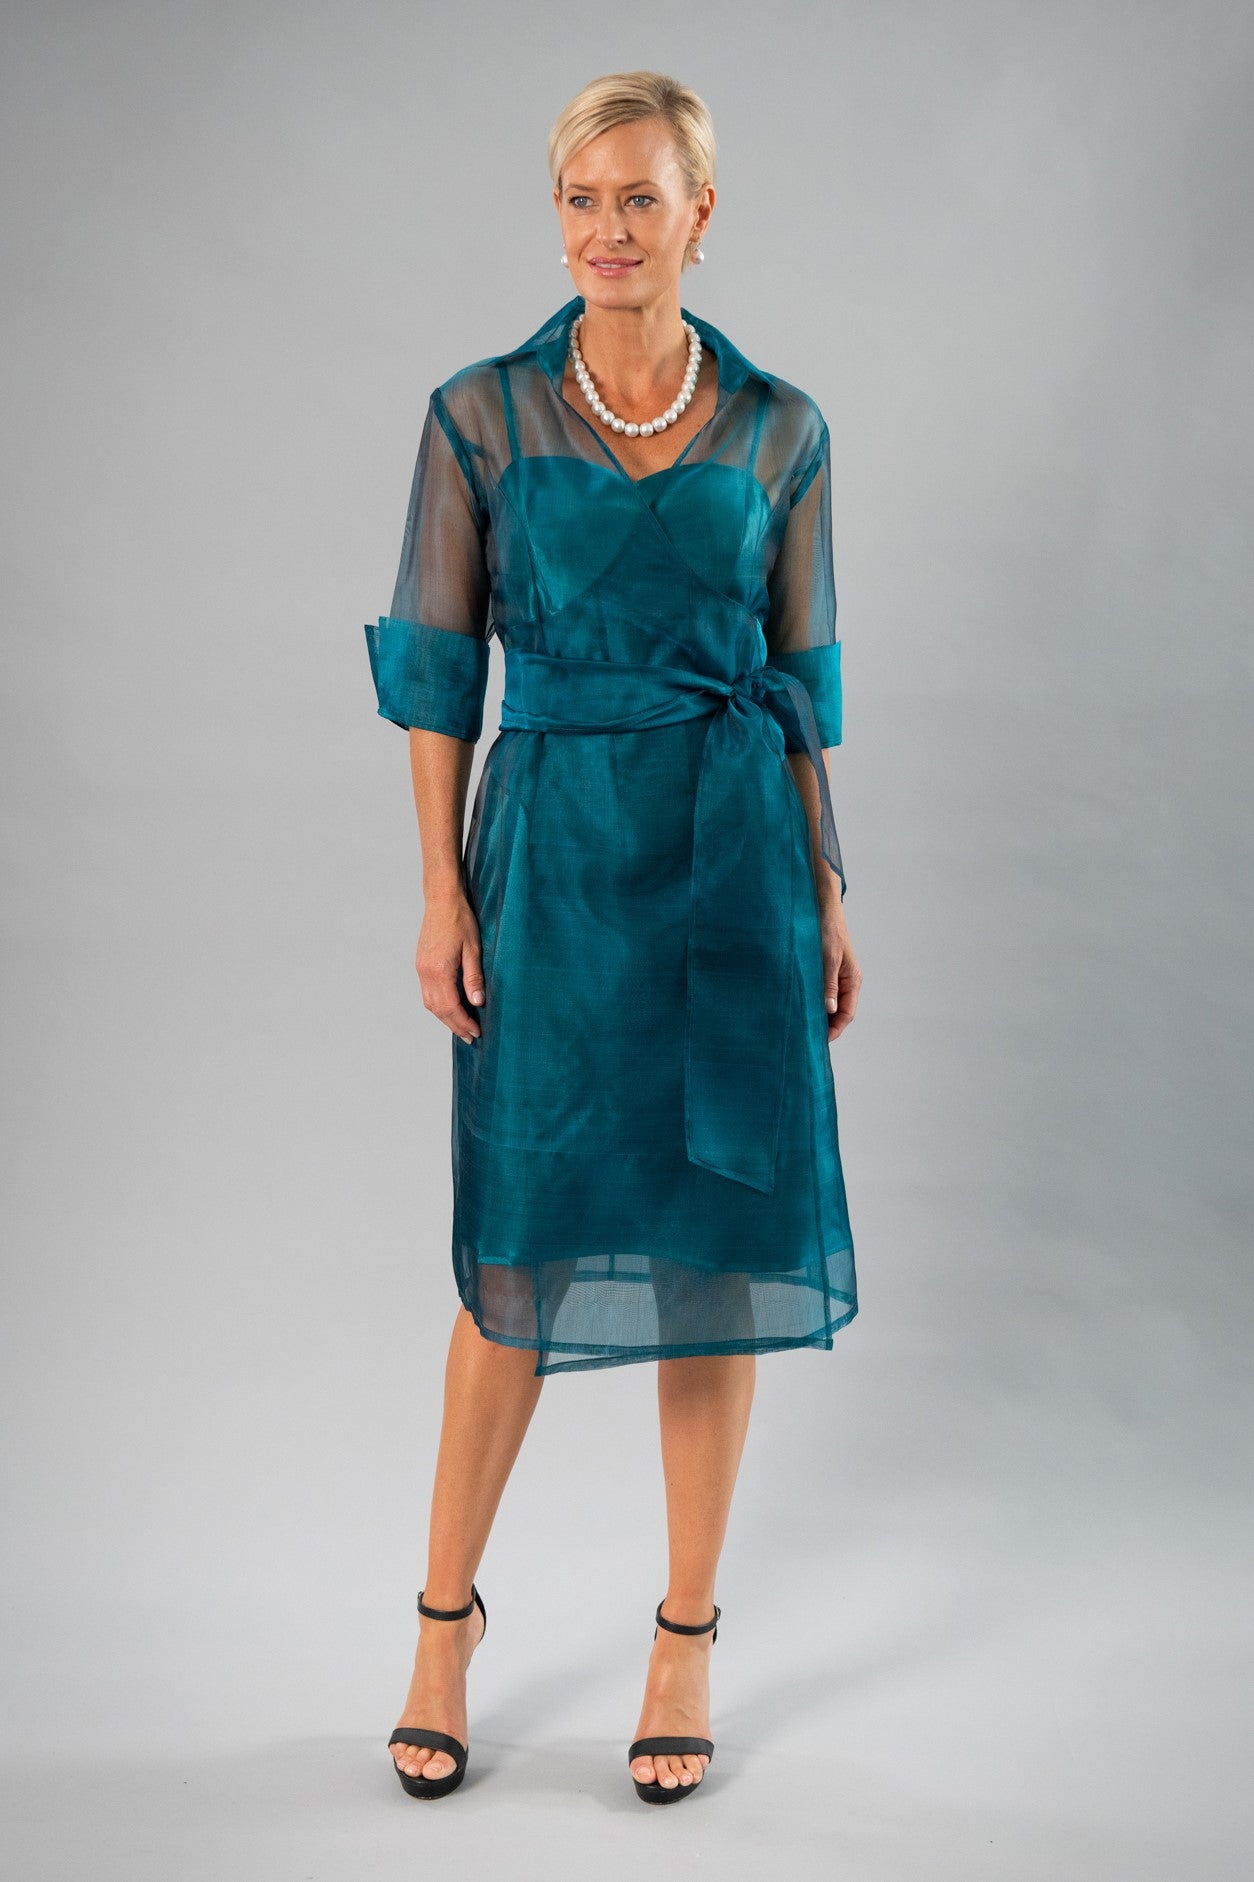 Cocktail Organza Wrap Dress - Teal for the Mother of the Bride / Groom